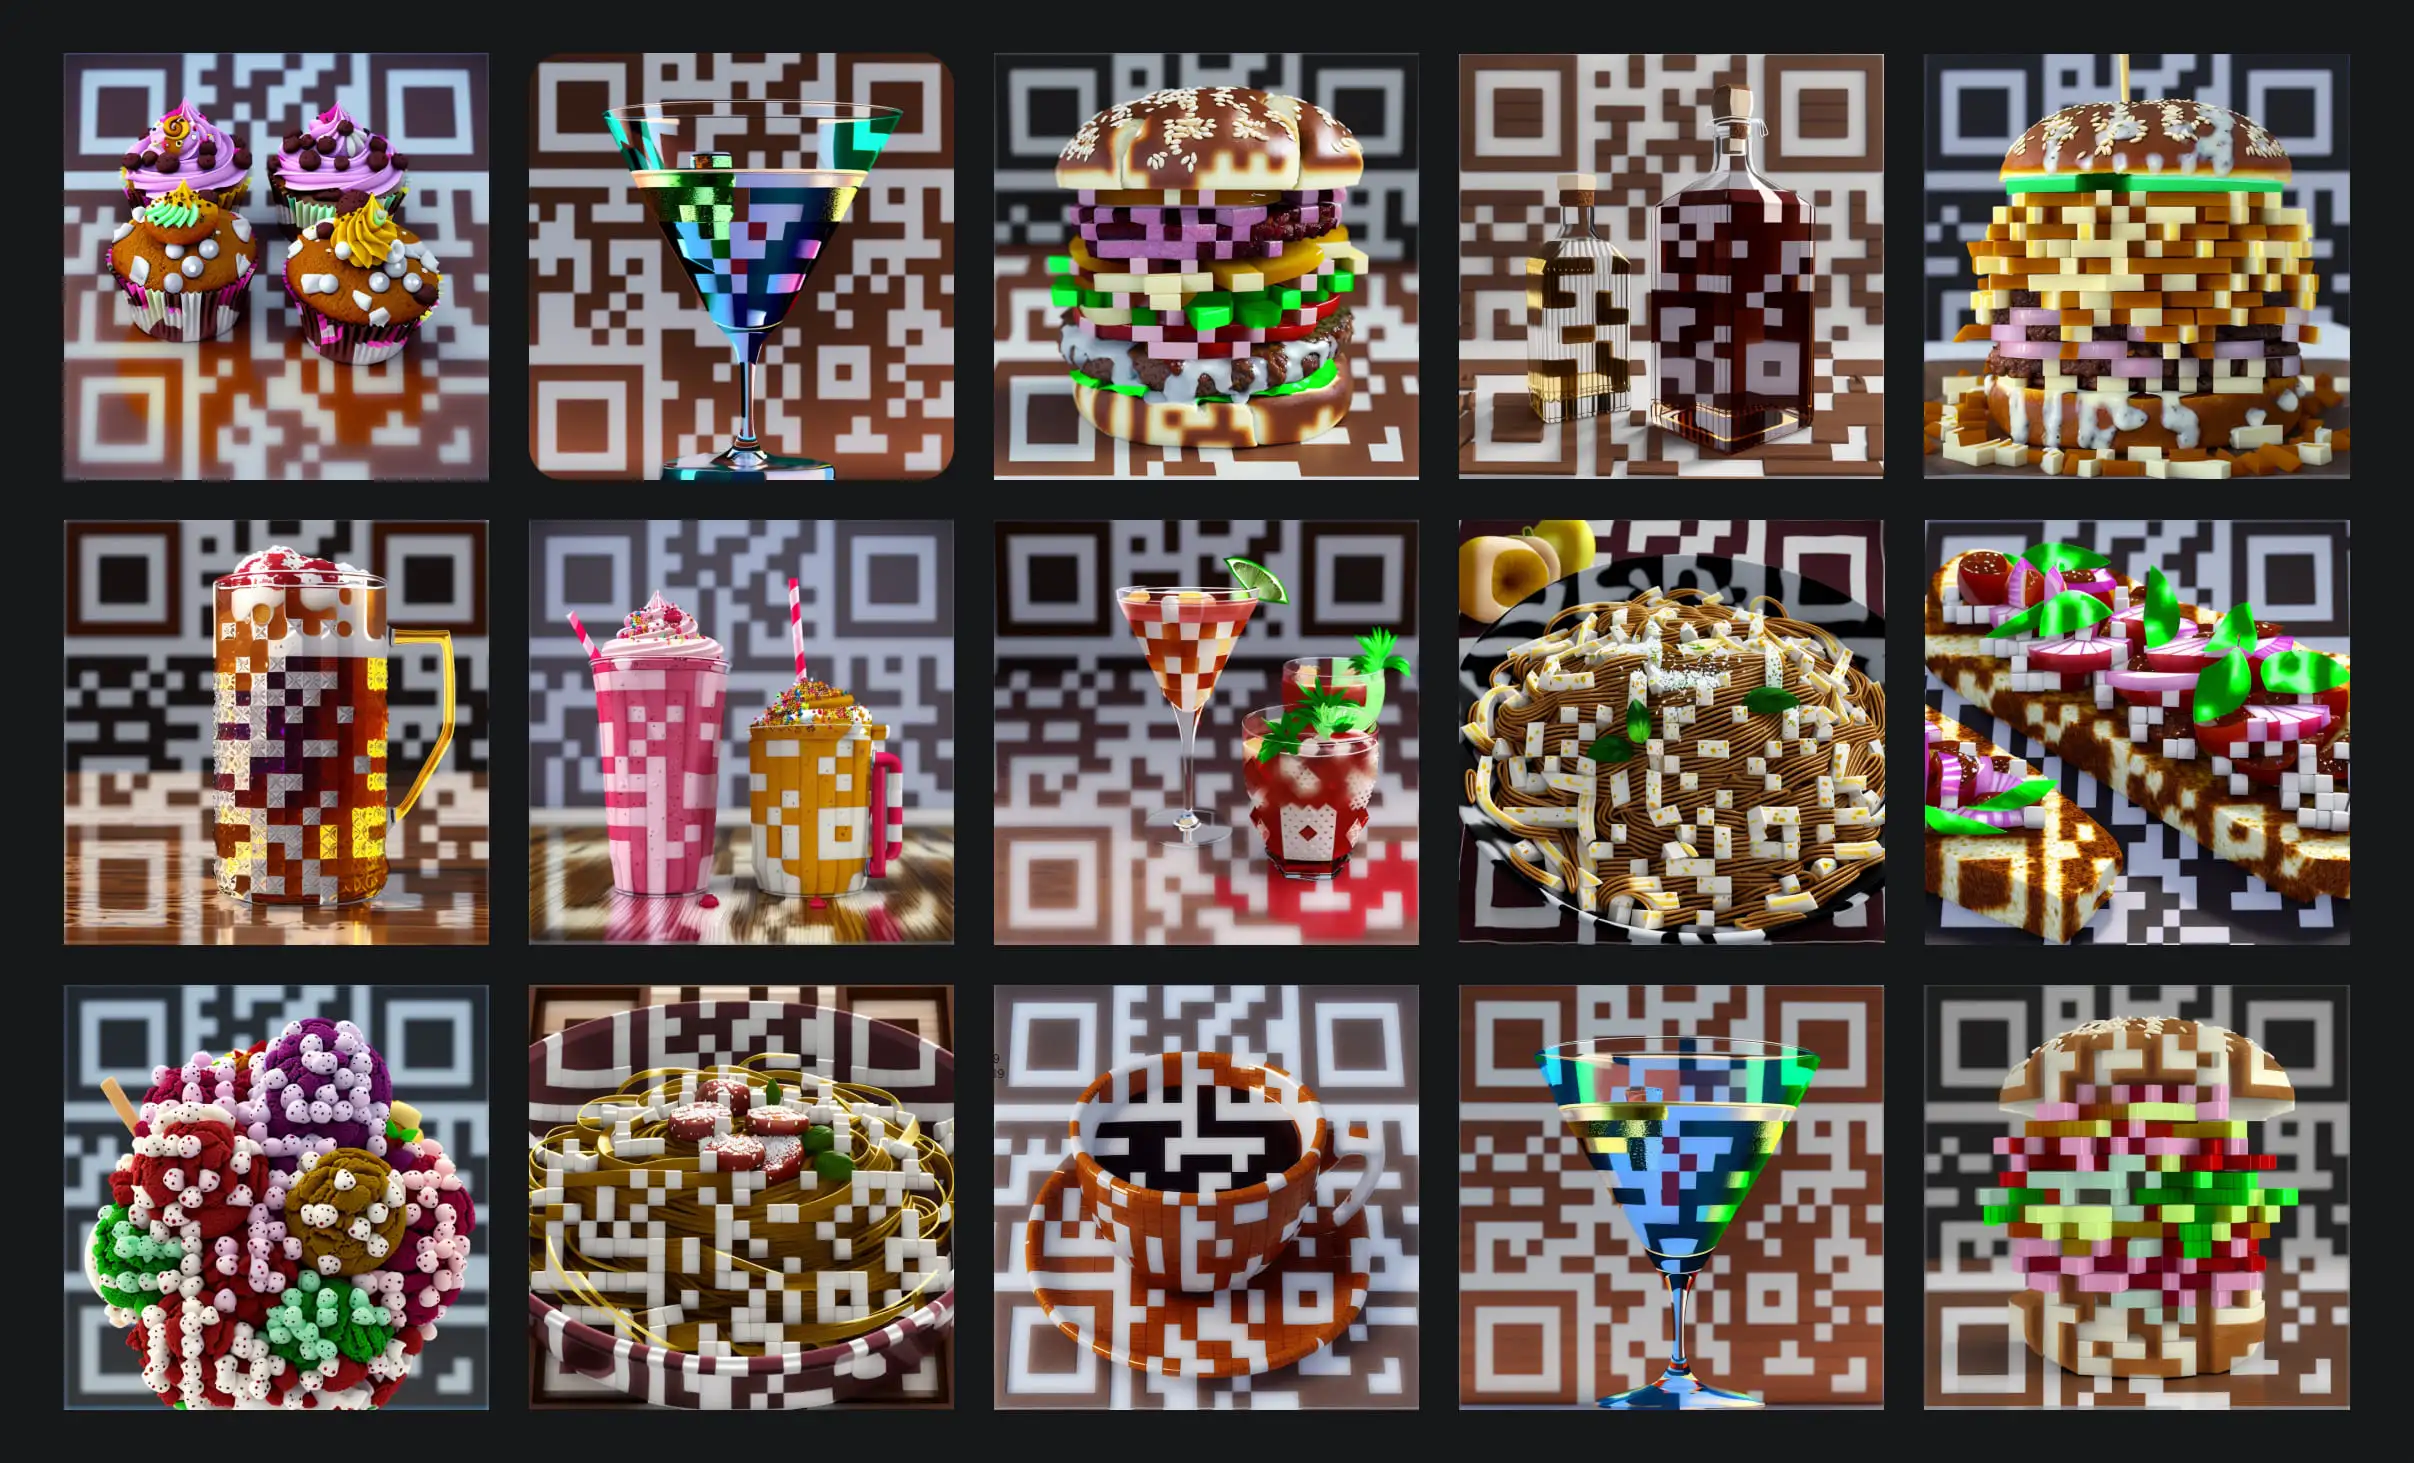 Grid of artistic QR codes themed on Asian food, drinks, and desserts